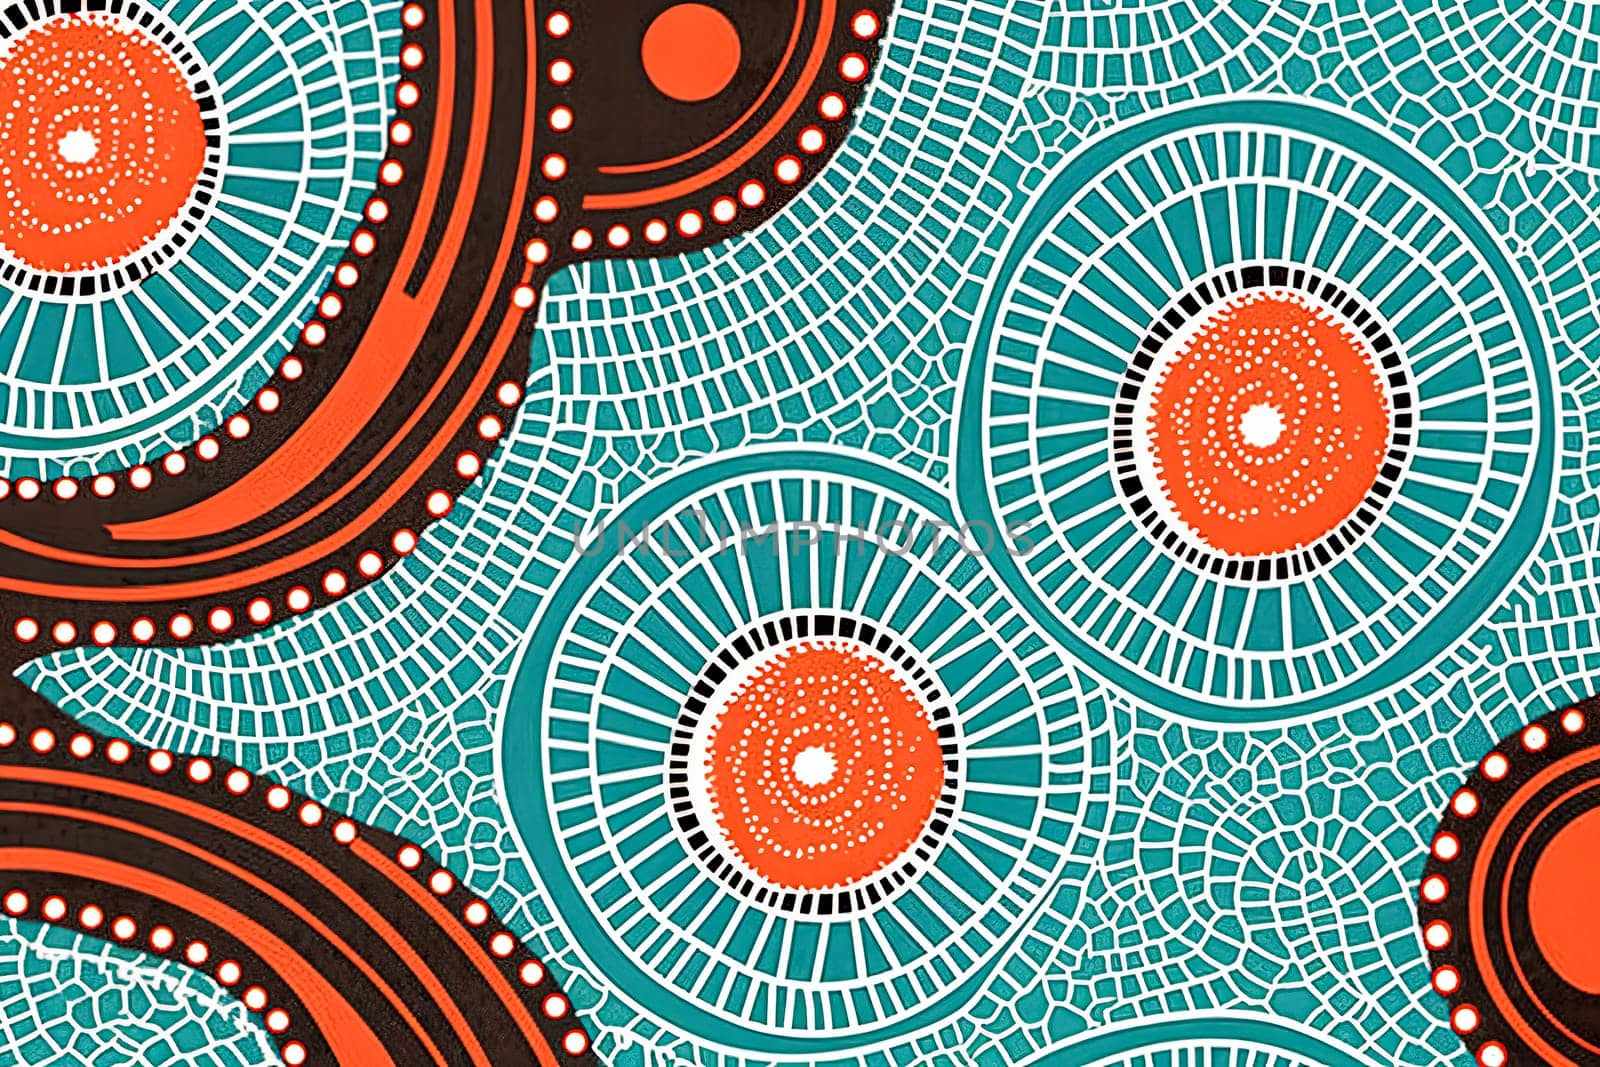 African geometric print, abstract art style seamless pattern. Hand drawn tribal decoration background with boho doodle shapes and ethnic symbols.